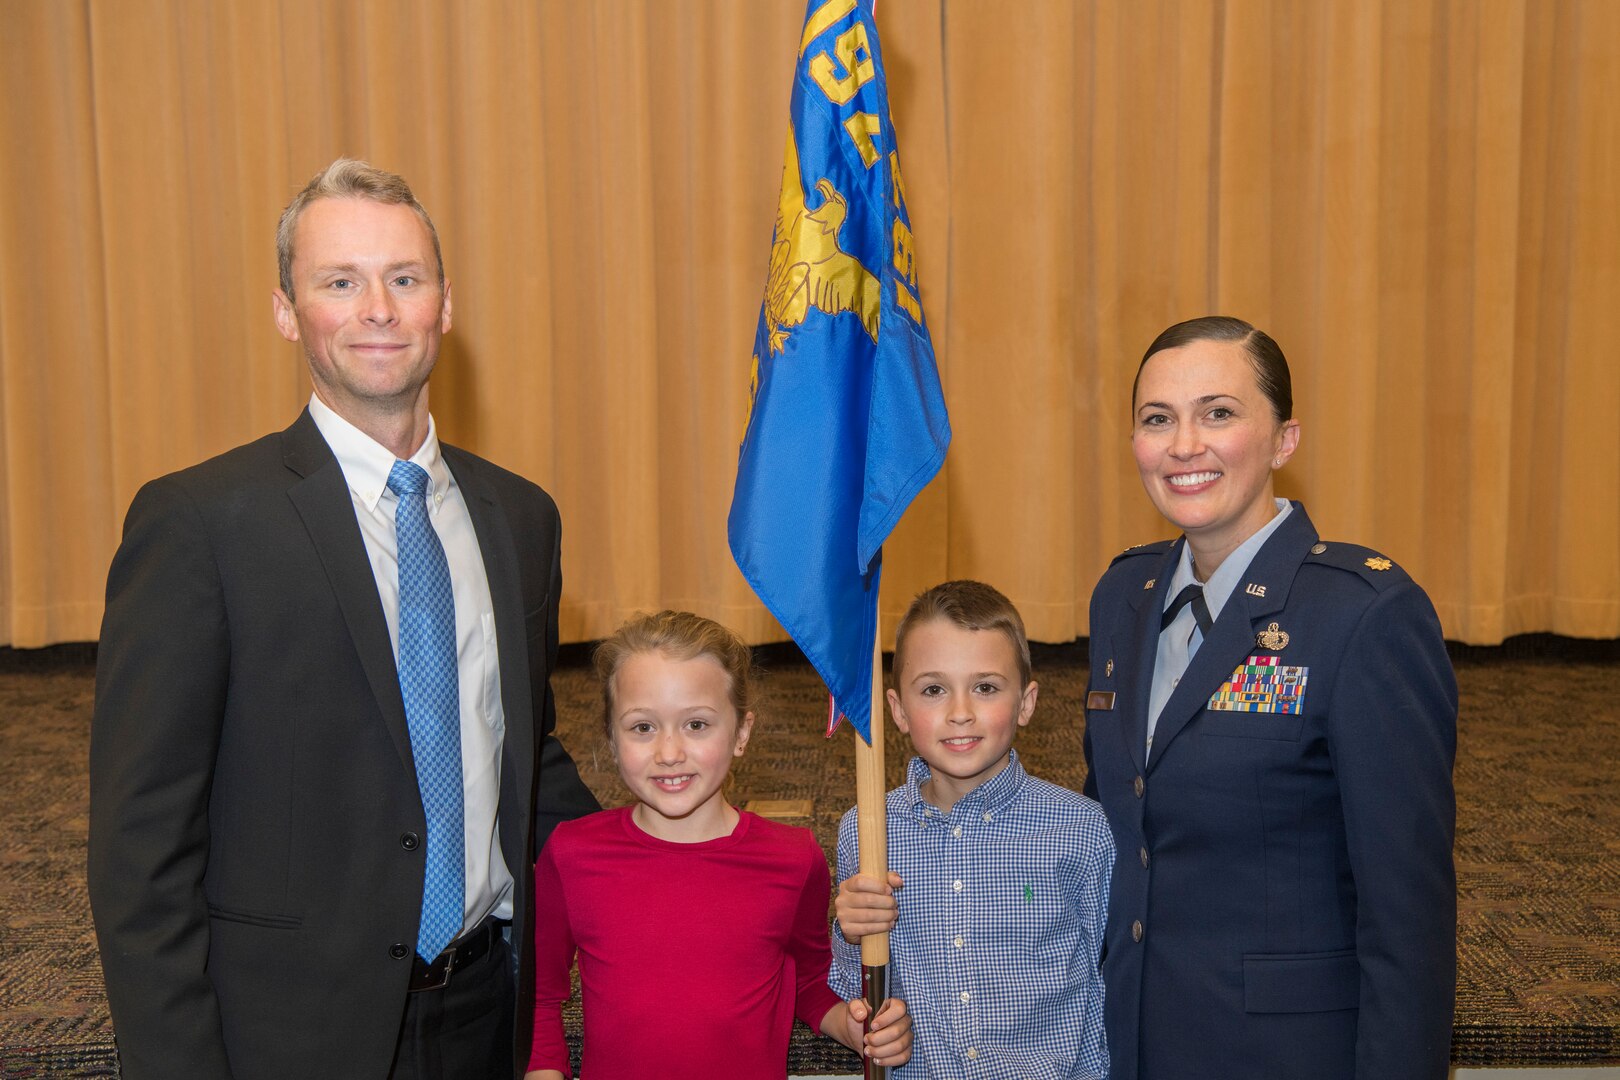 An Airman poses for a photo with her family